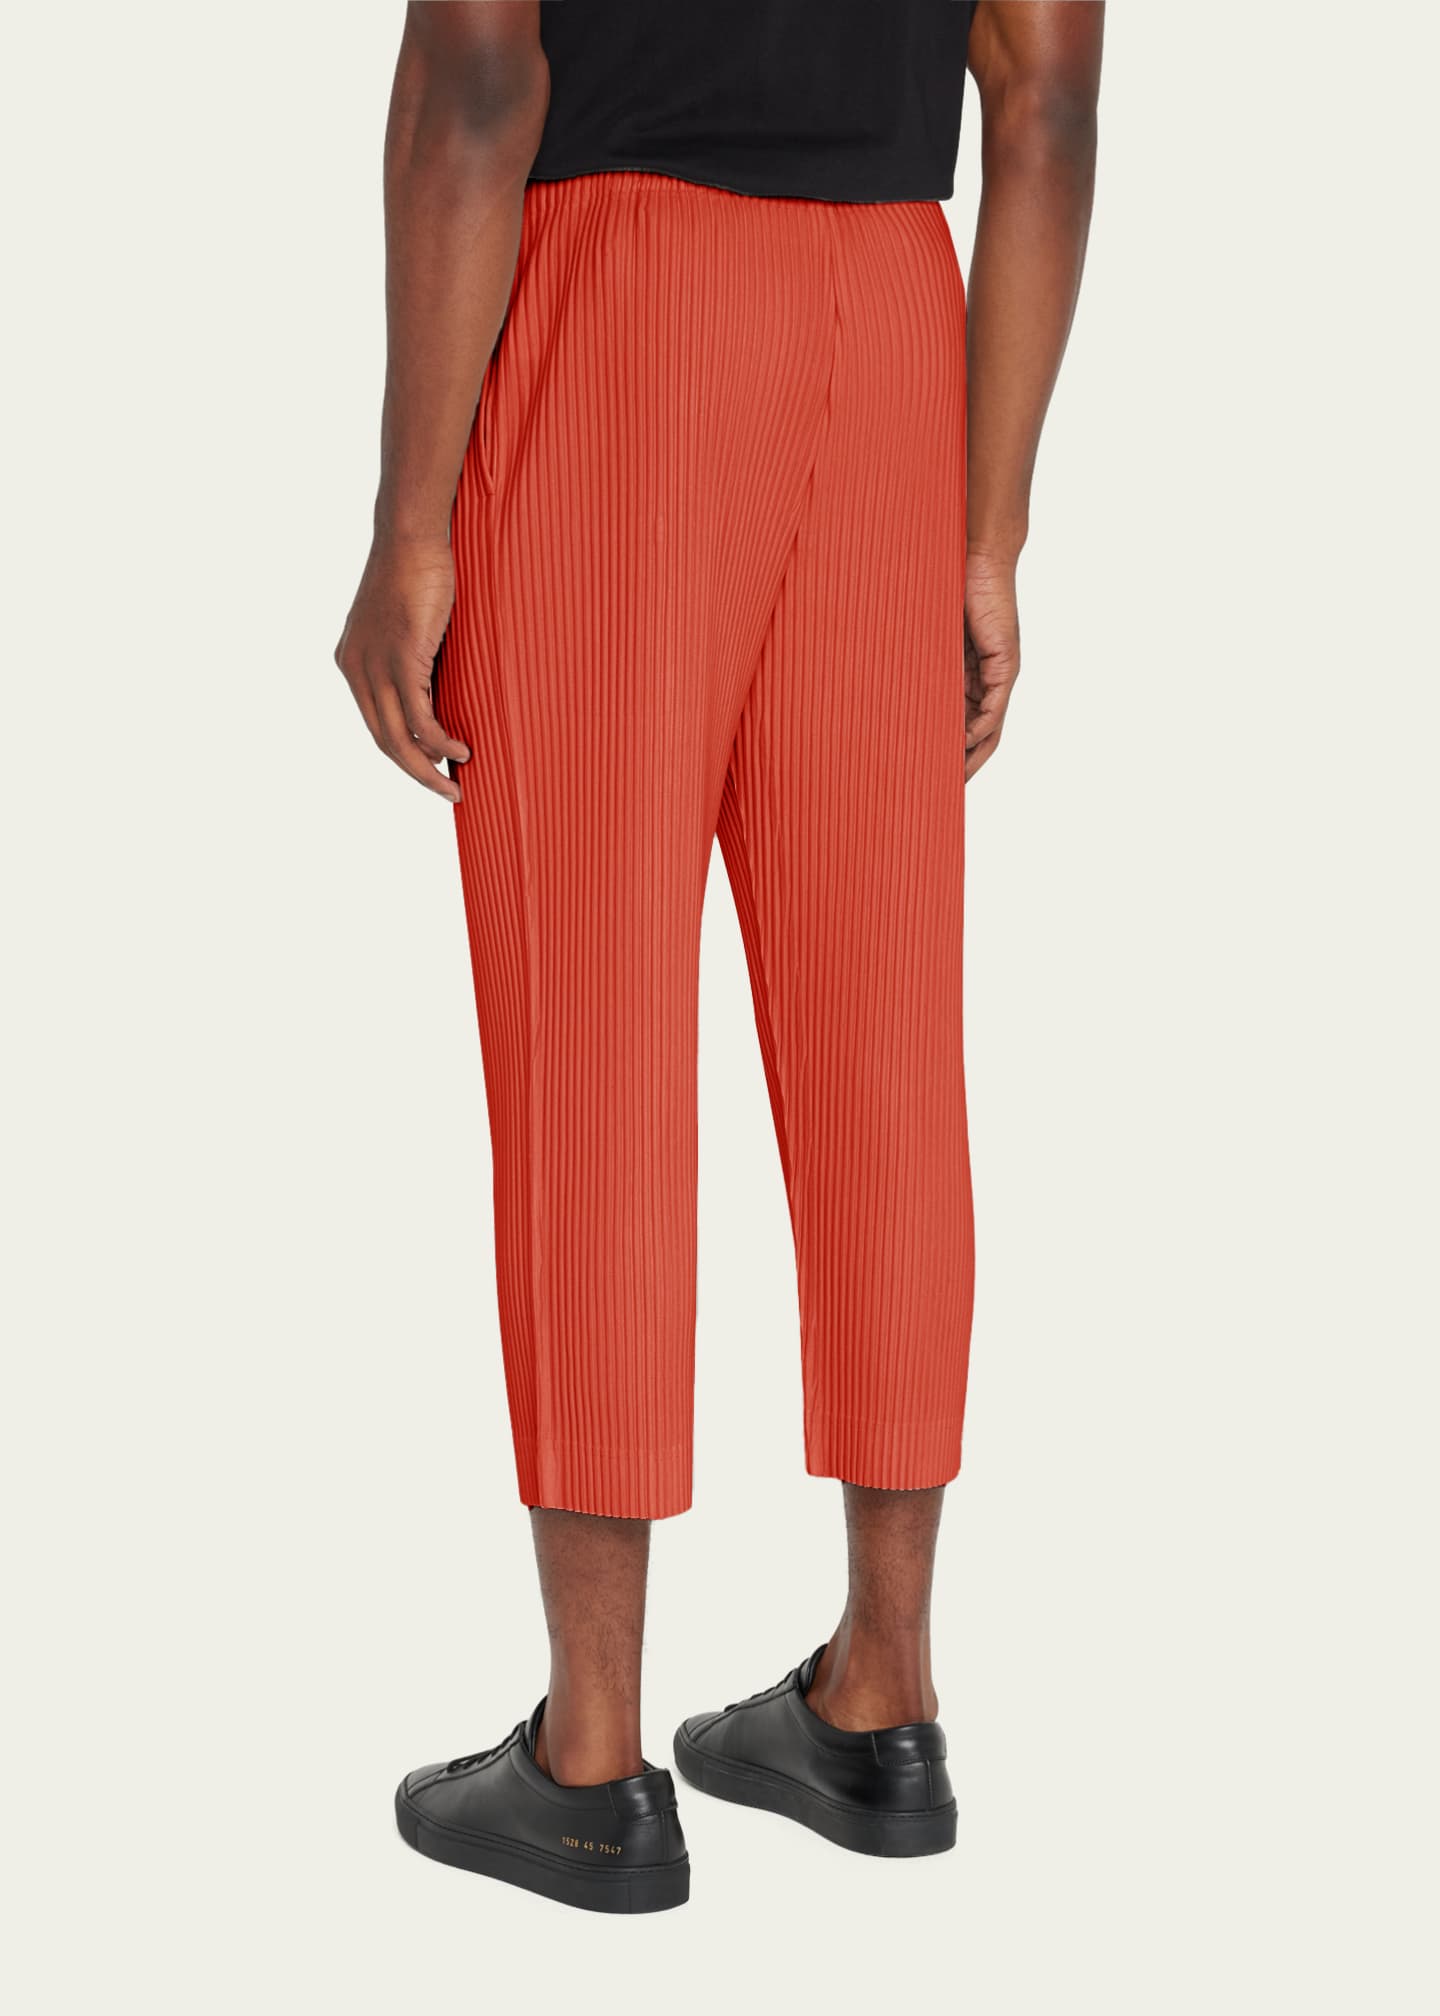 Issey Miyake Pleated Cropped Pants